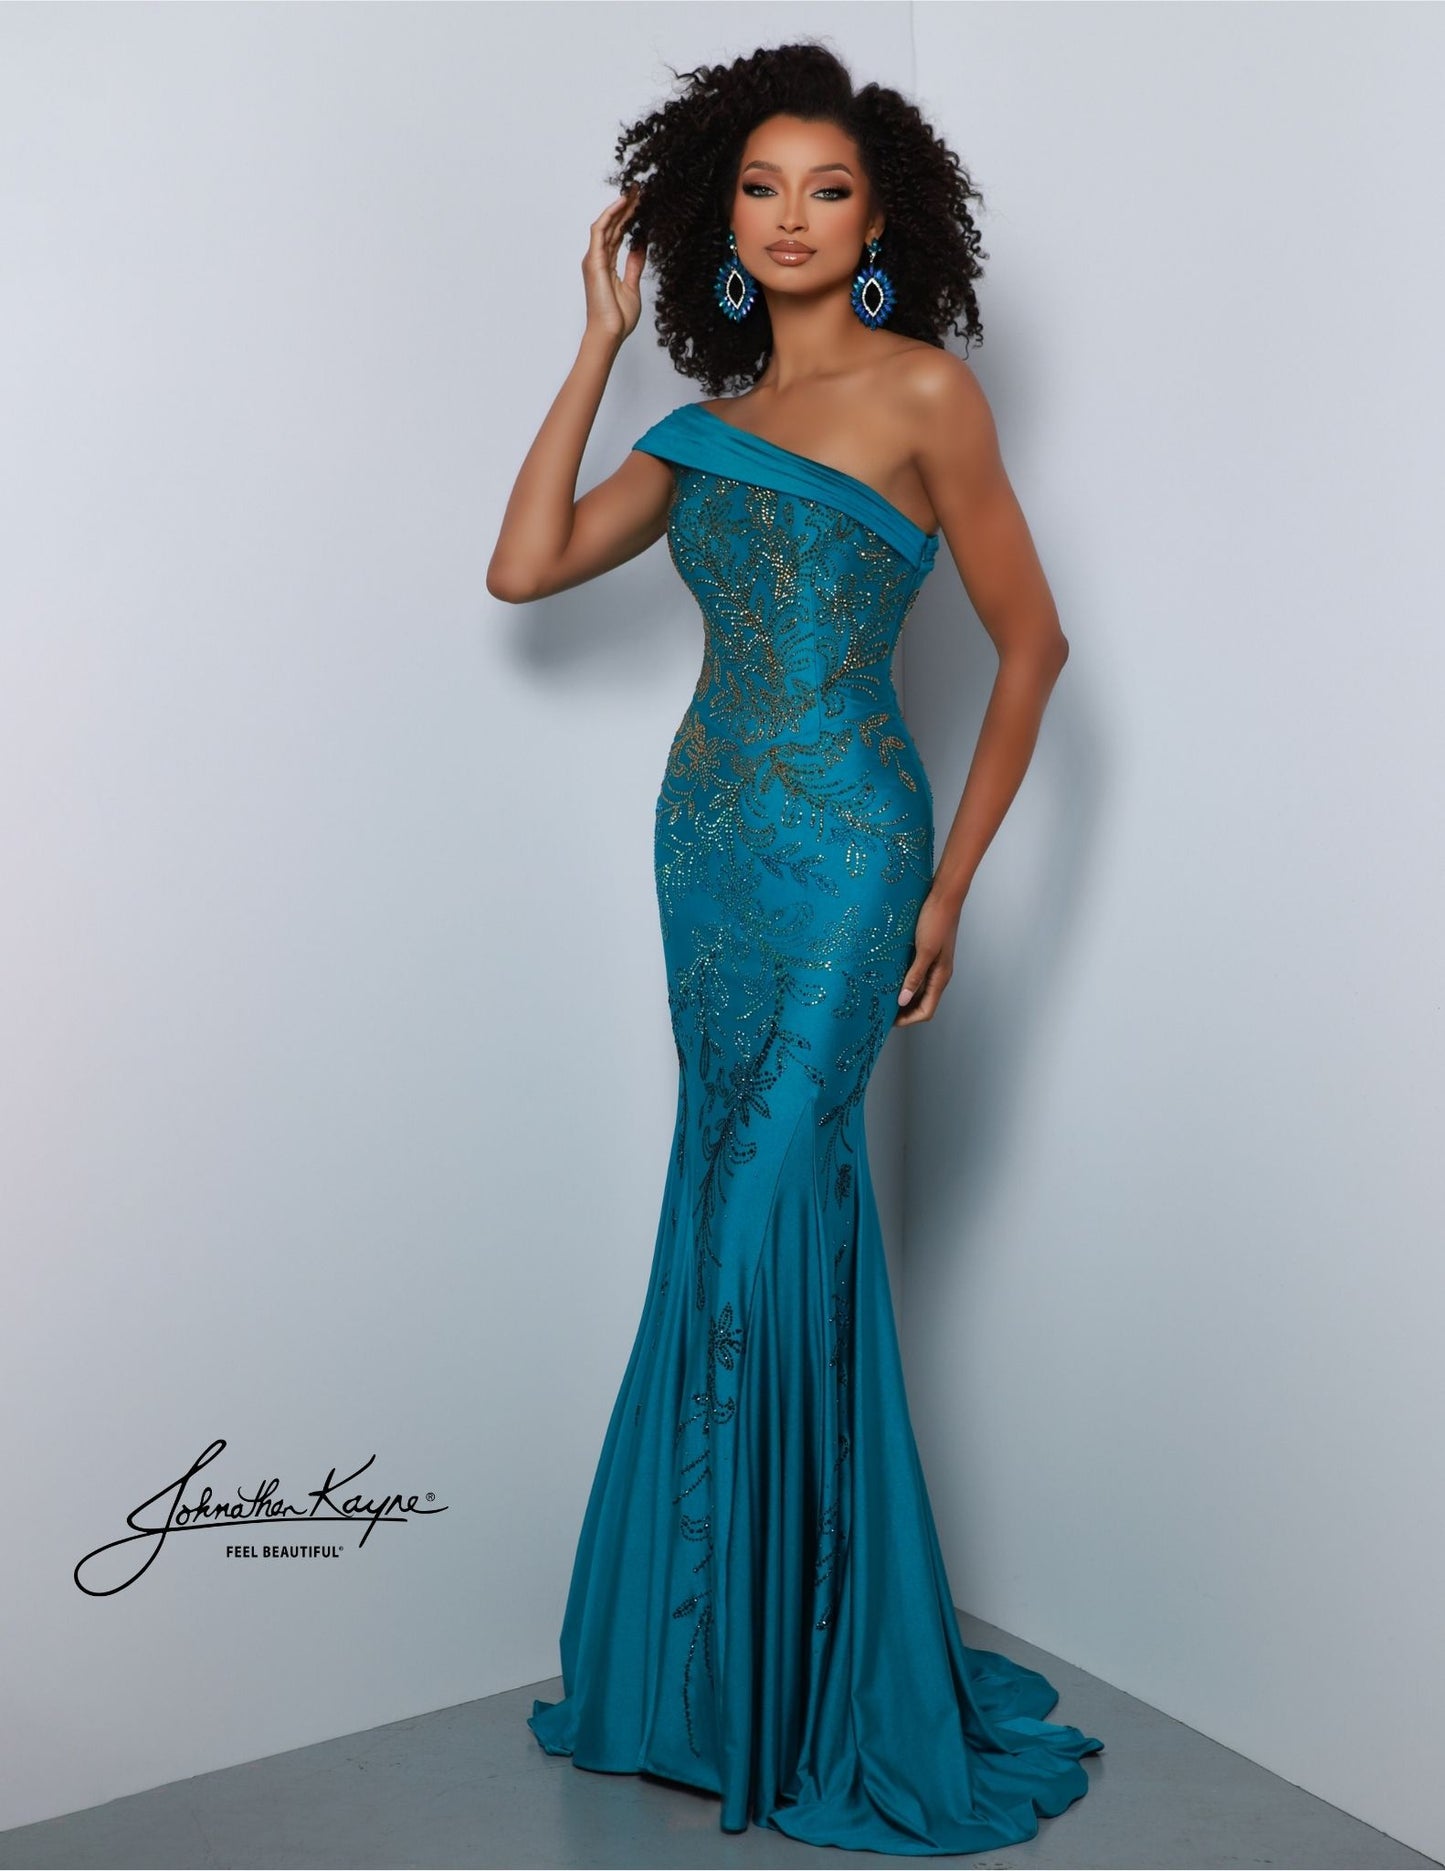 This Johnathan Kayne 2872 Long Prom Dress is designed to be impactful and stylish. The one shoulder beaded bodice. The mermaid train skirt flows to a dramatic finish. A perfect statement dress for the most special of occasions. You're ombre-viously dressed to impress in this one-shoulder gown! Crafted from 4 Way Stretch Lycra, this fit and flare gown is a vision of elegance. Don't forget to showcase off the back featuring the elegant cut outs.